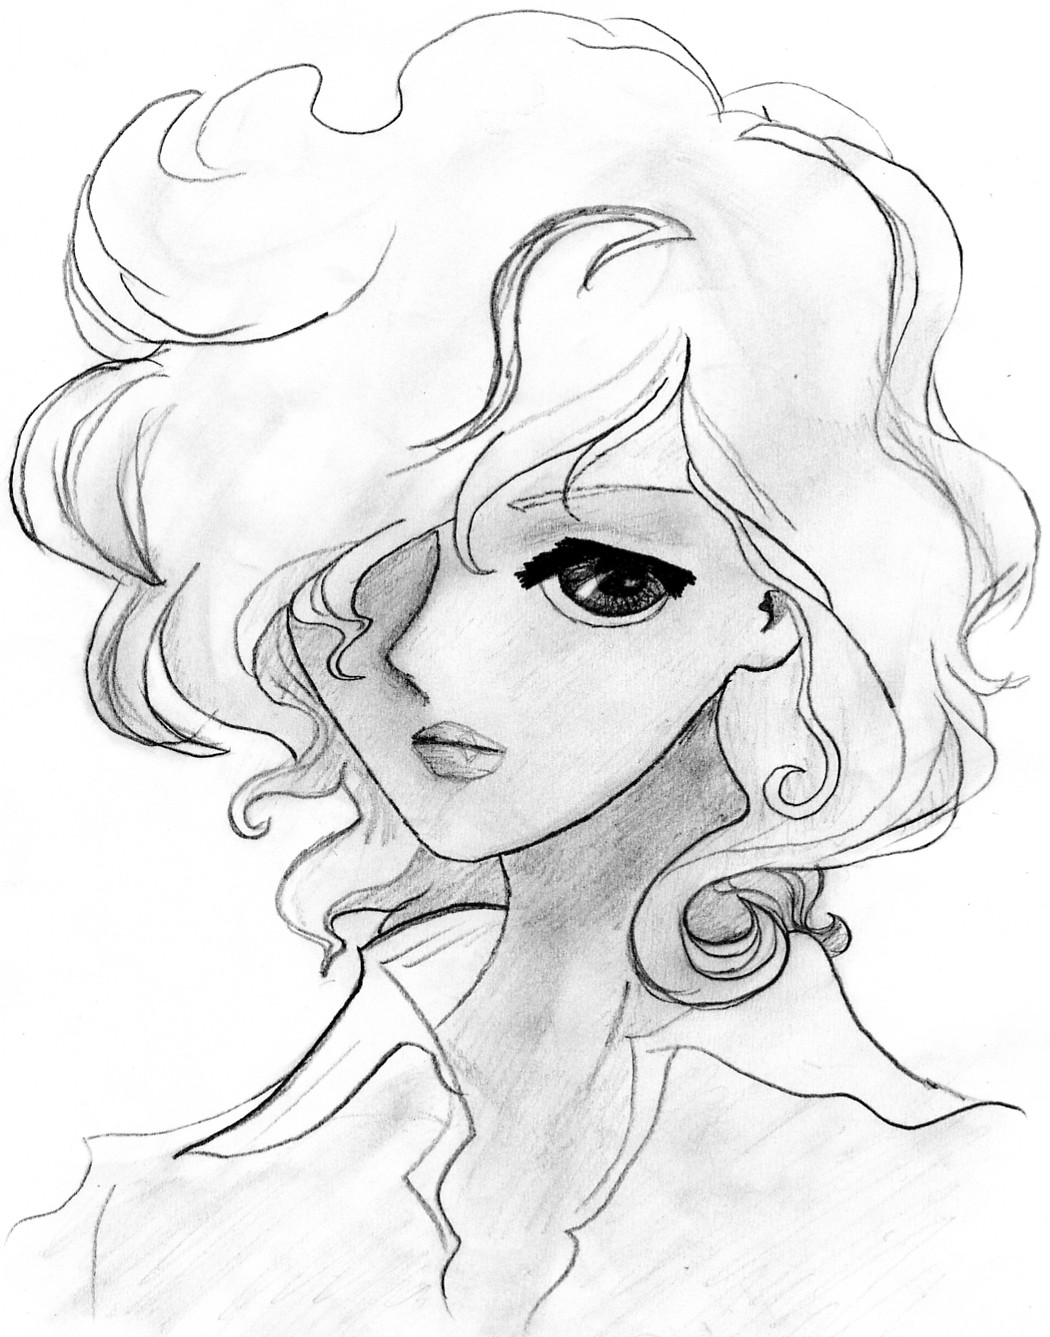 Wavy Anime Hairstyles
 Girl wi curly hair by franbo on DeviantArt